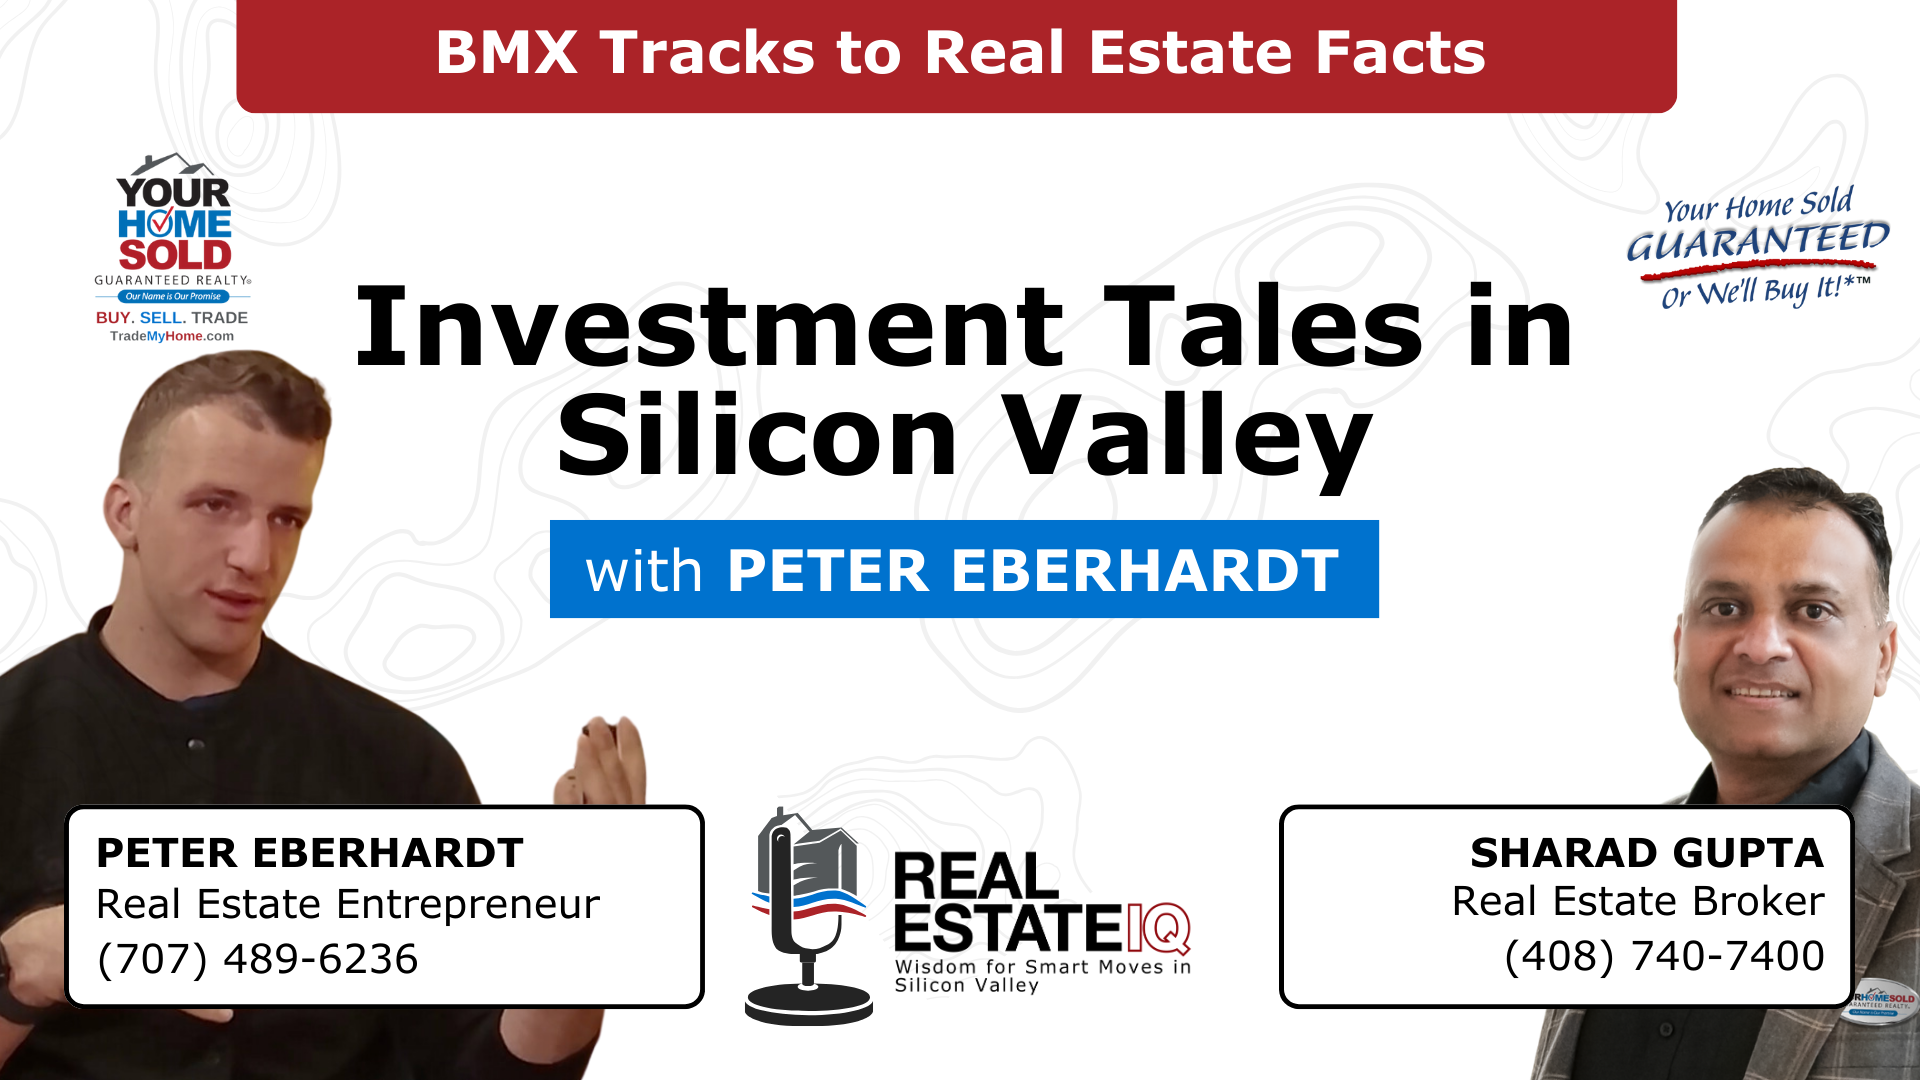 BMX Tracks to Real Estate Facts: Peter’s Silicon Valley Investment Tale